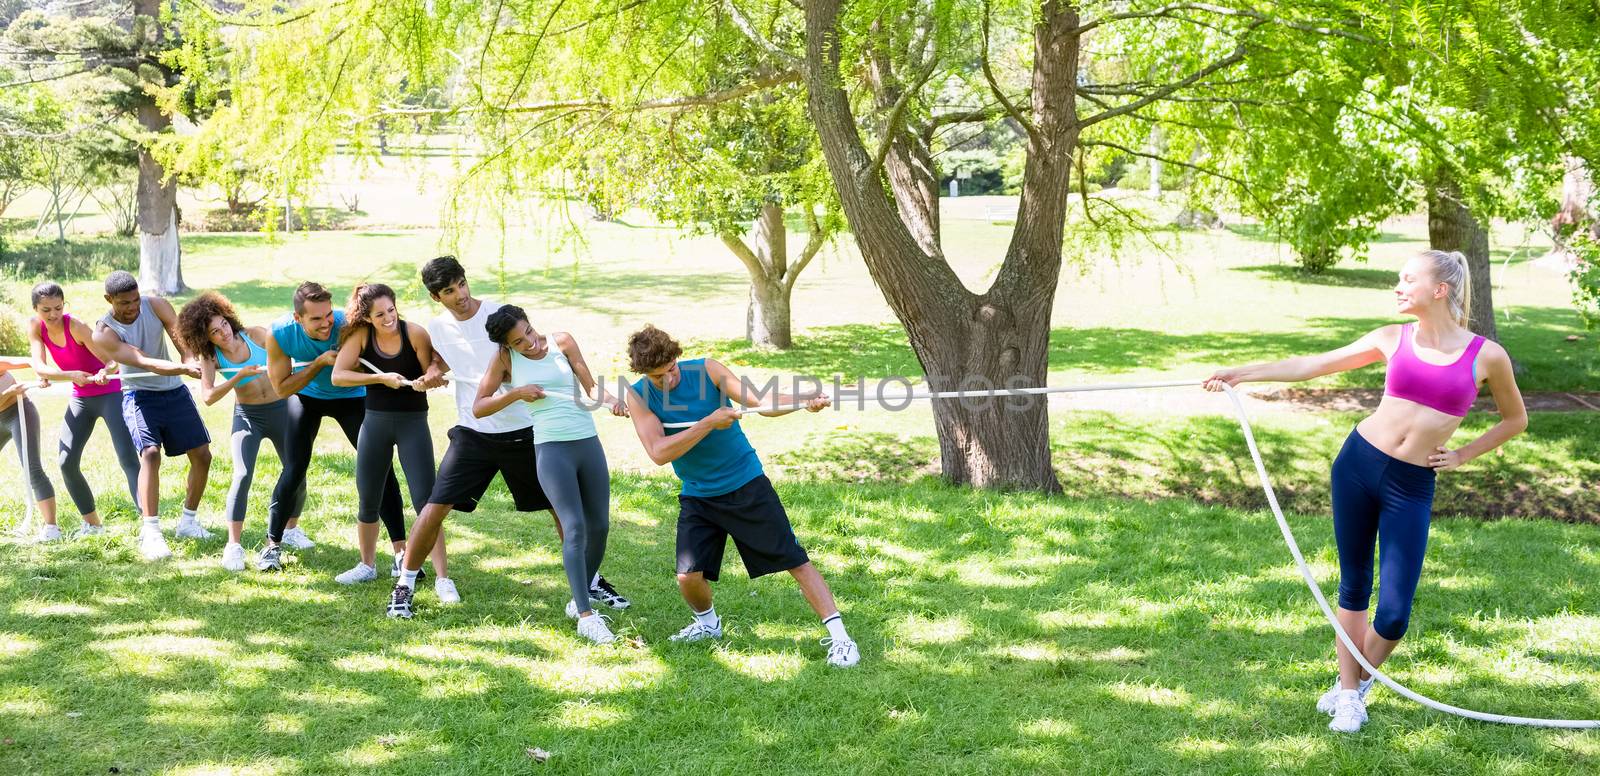 Fit woman playing tug of war with group of friends in the park